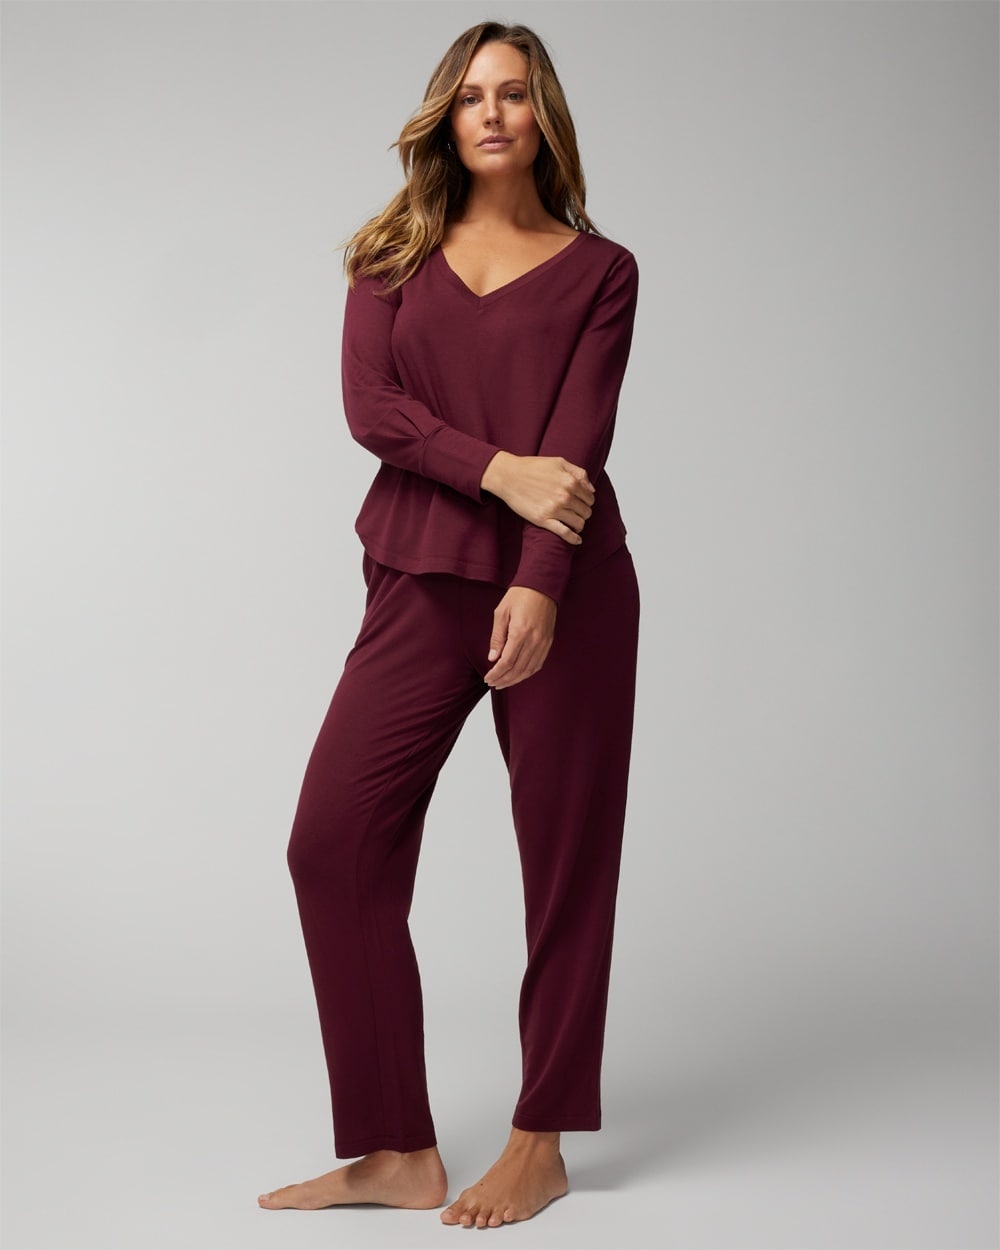 Soma Women's  Long Sleeve V-neck Loungewear Set In Big Cab Size 2xl |  In Red